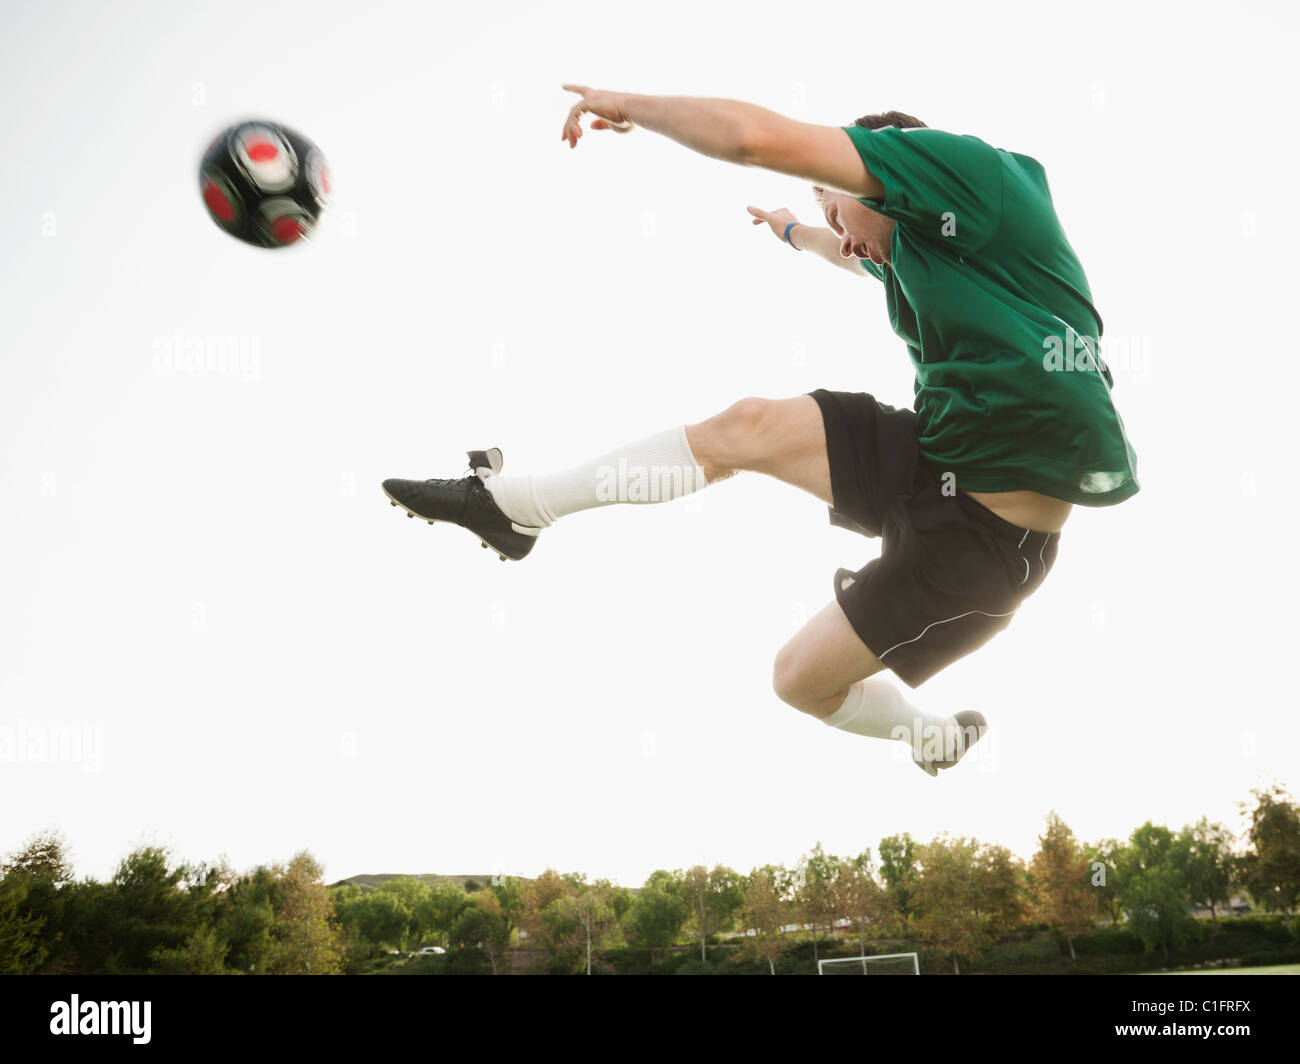 Caucasian soccer player in mid-air kicking soccer ball Stock Photo